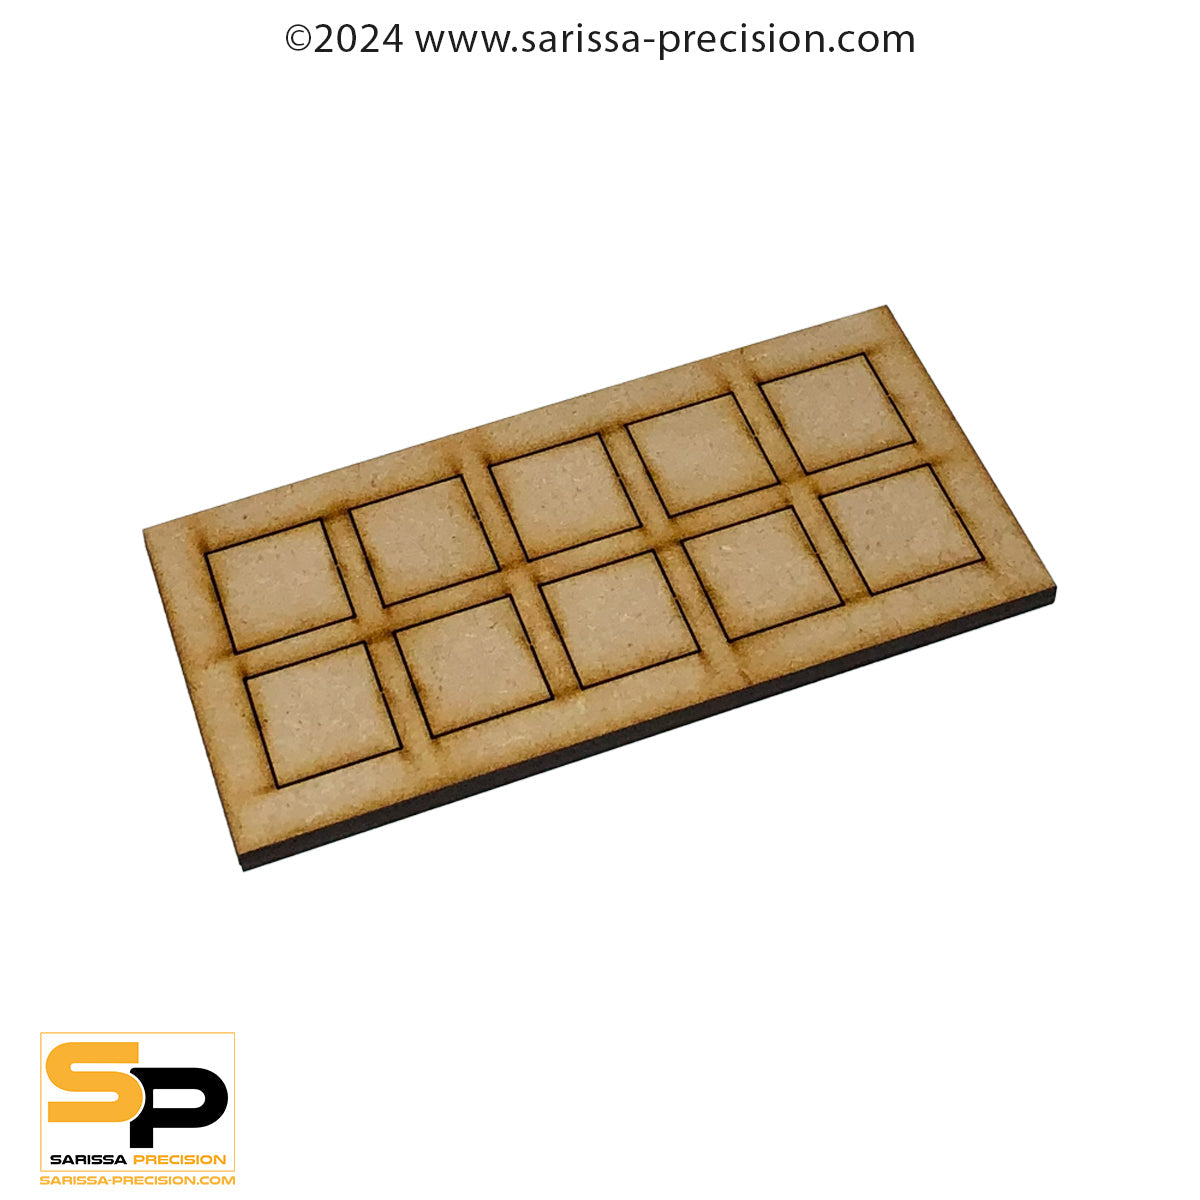 15x9 25x25mm Conversion Tray for 20x20mm bases